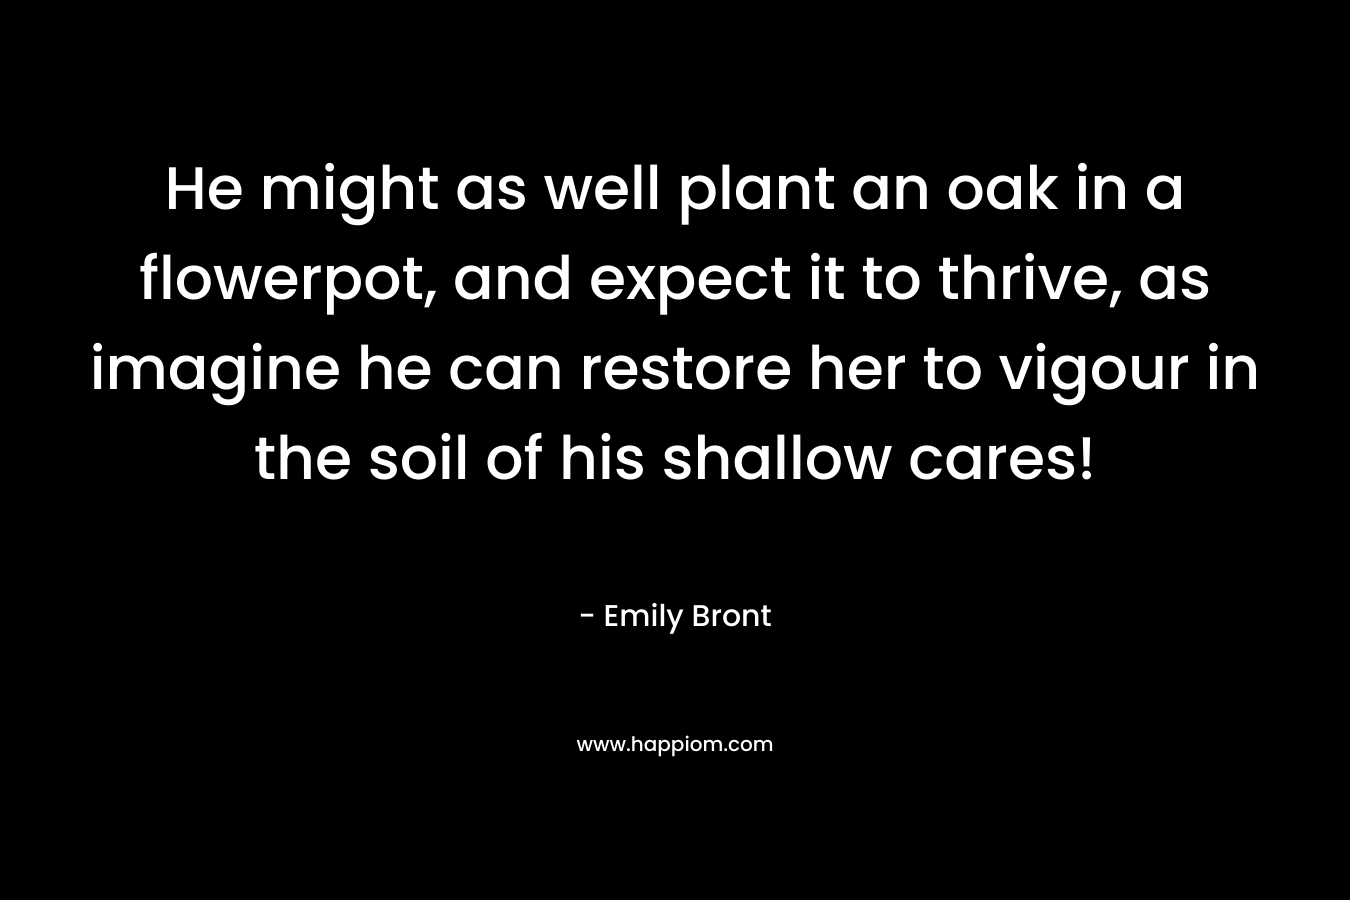 He might as well plant an oak in a flowerpot, and expect it to thrive, as imagine he can restore her to vigour in the soil of his shallow cares!